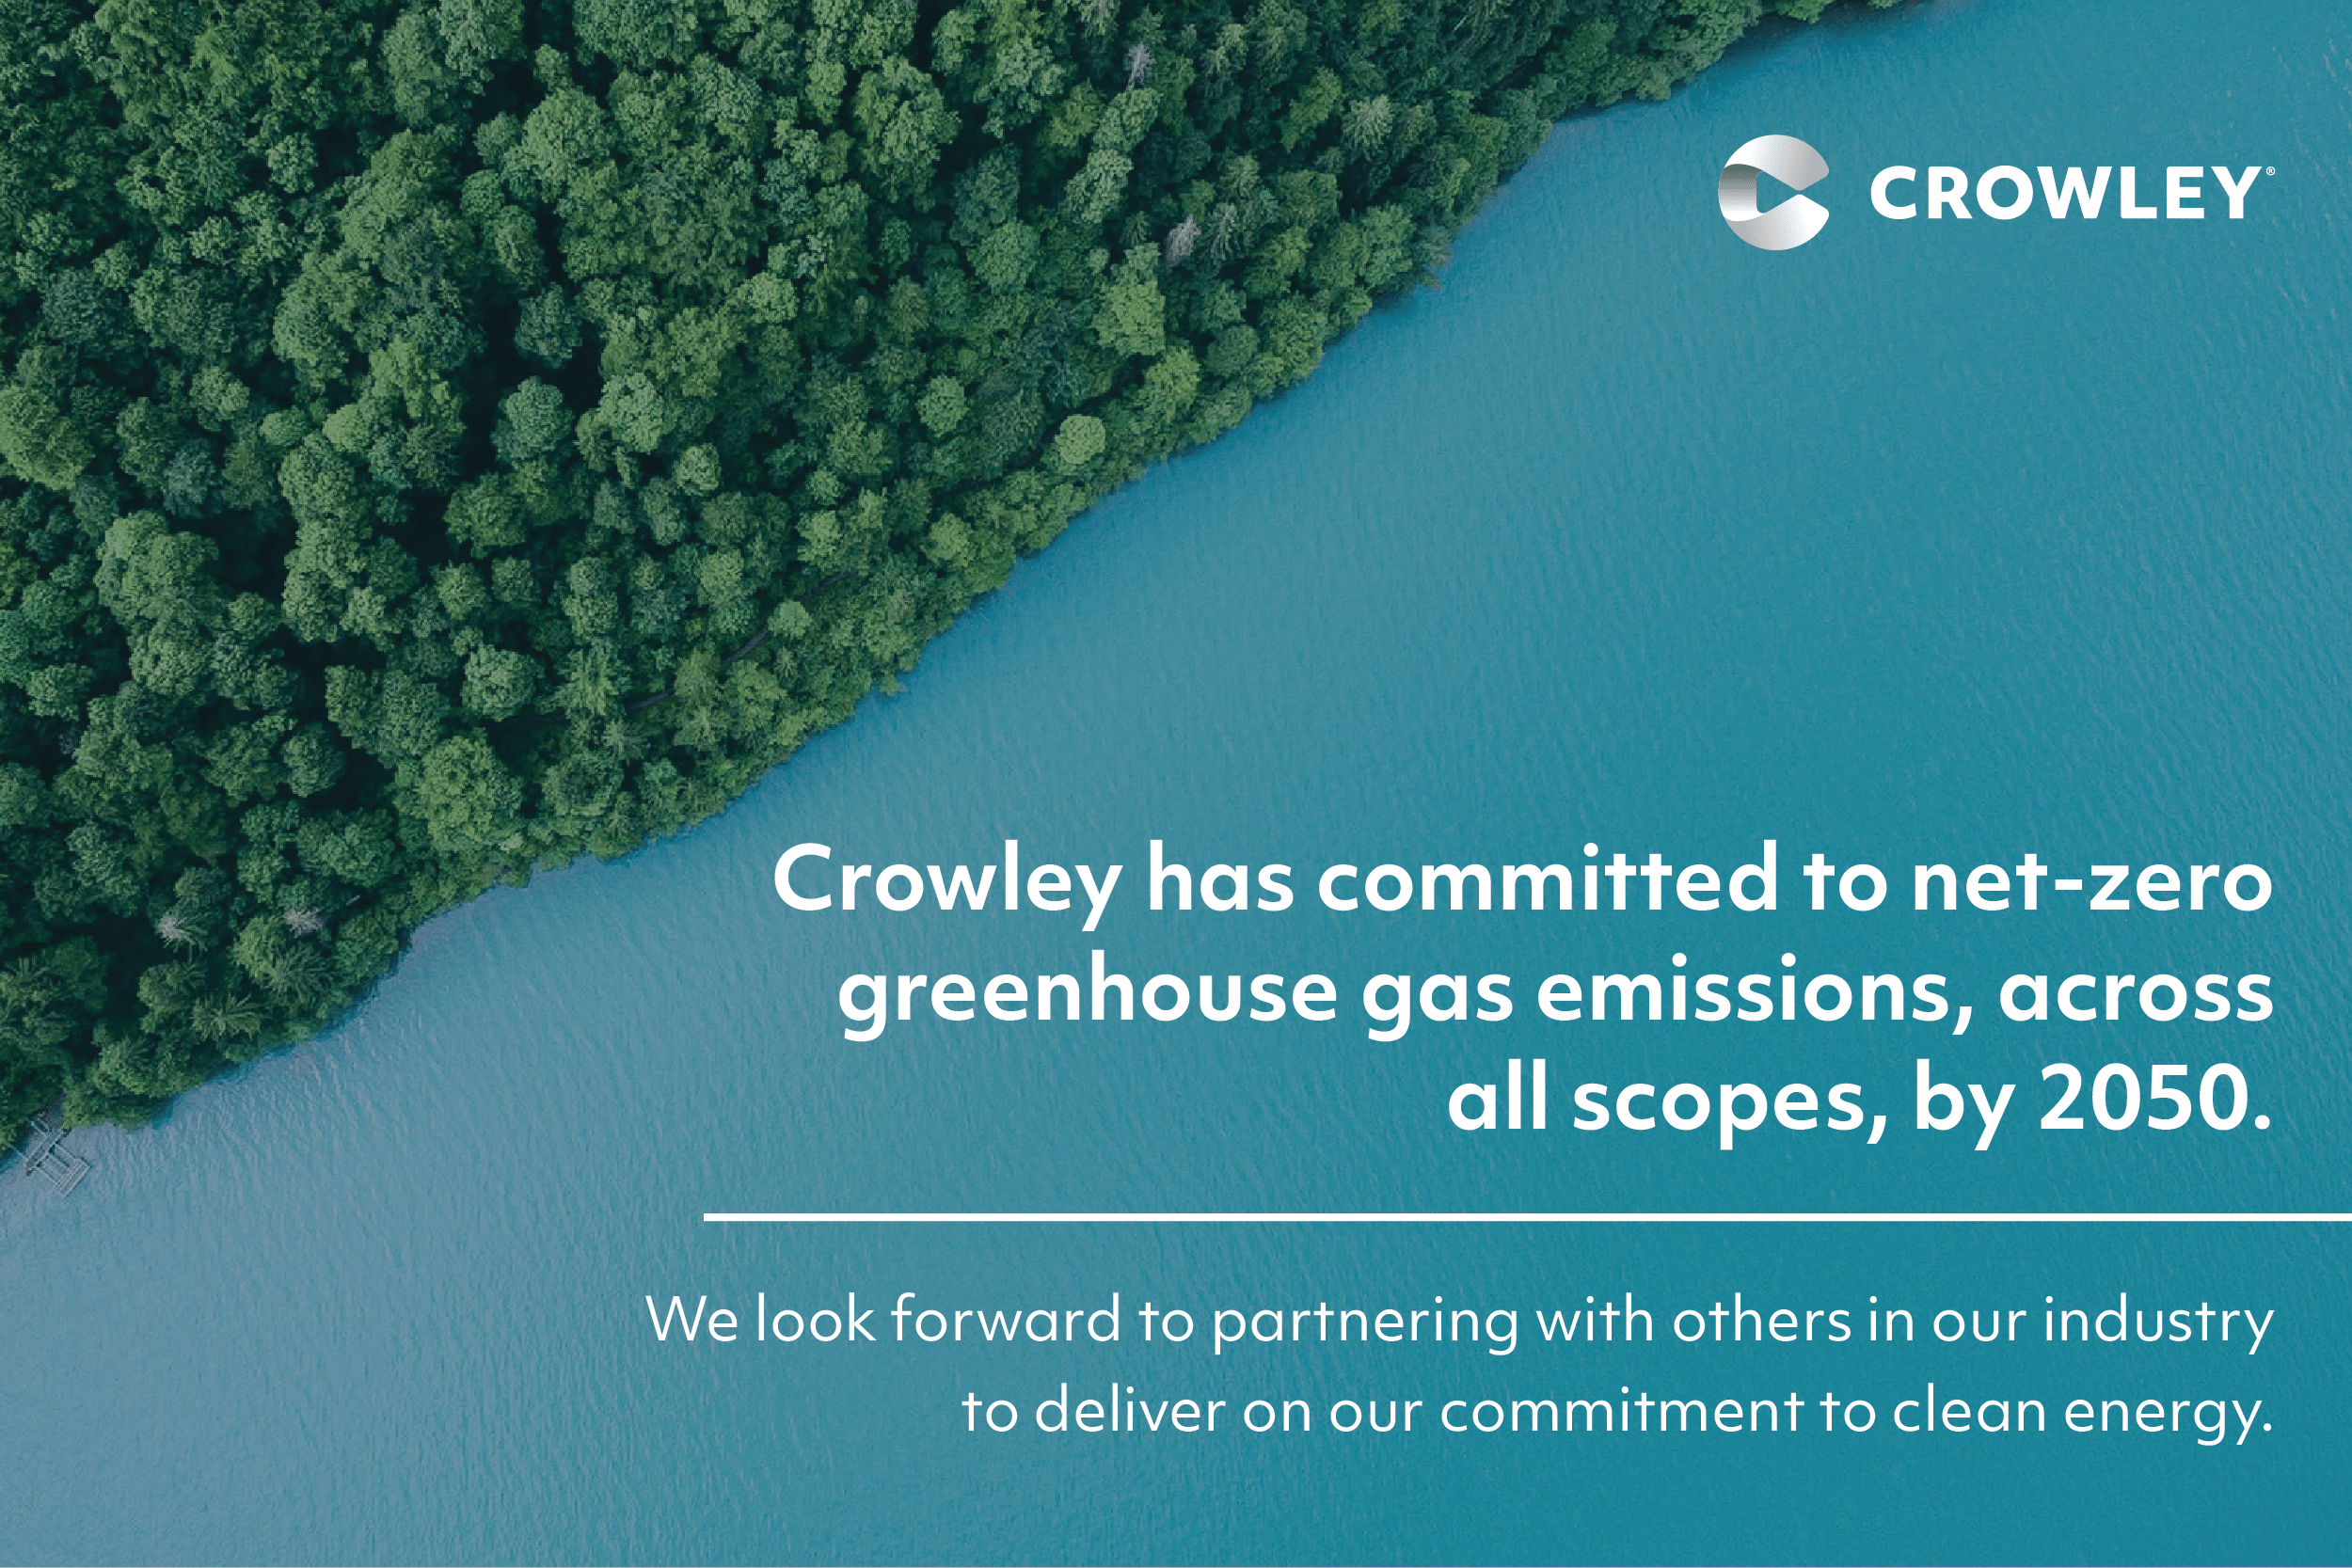 Crowley has committed to net-zero greenhouse emissions, across all scopes by 2050.